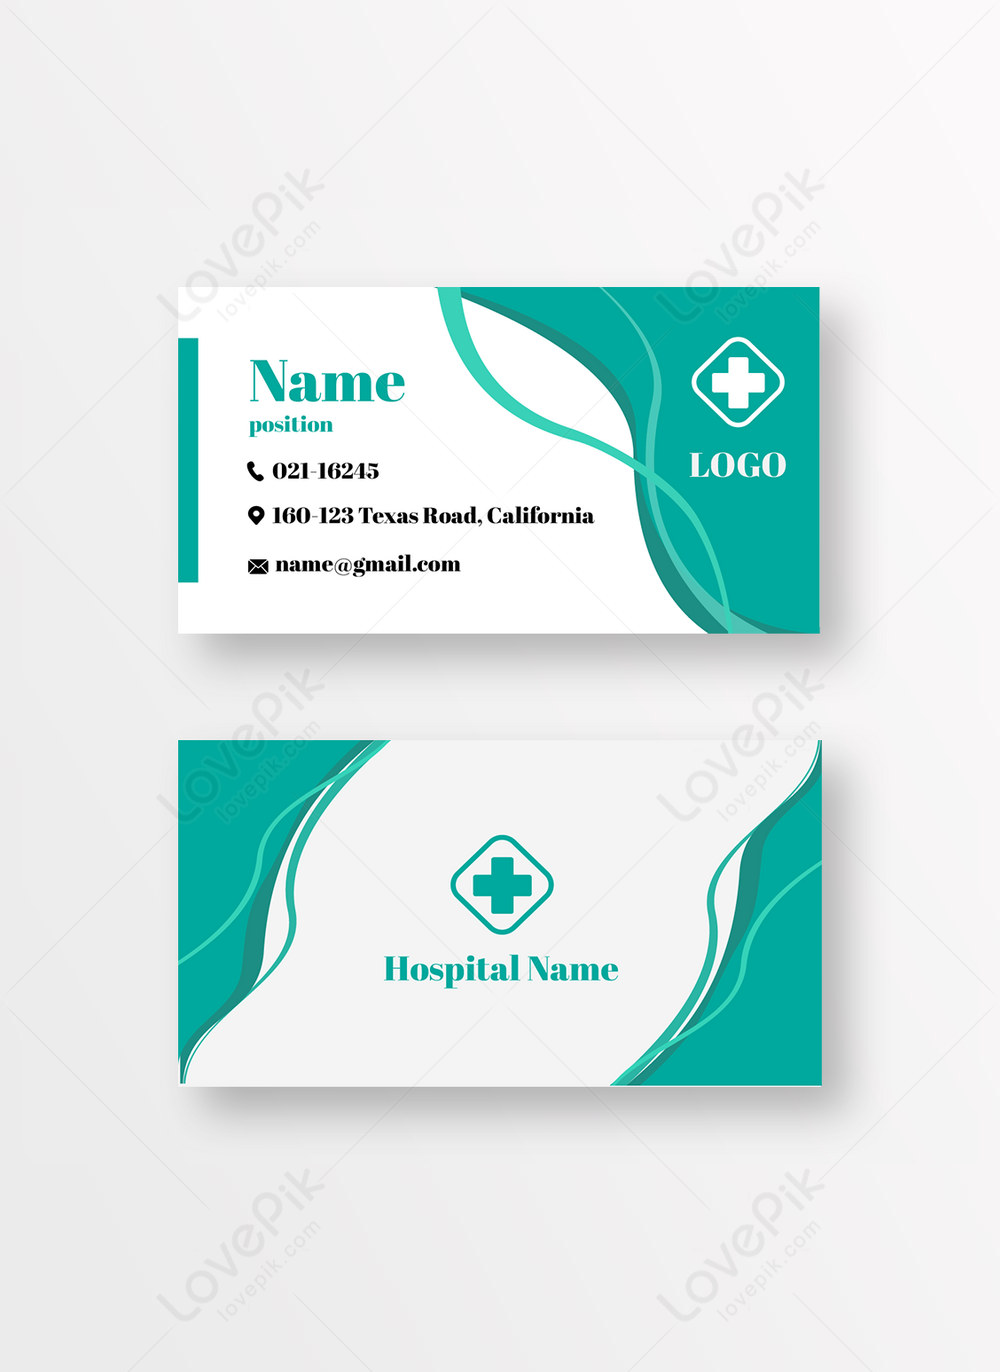 Medical hospital theme business card design template image_picture Regarding Medical Business Cards Templates Free